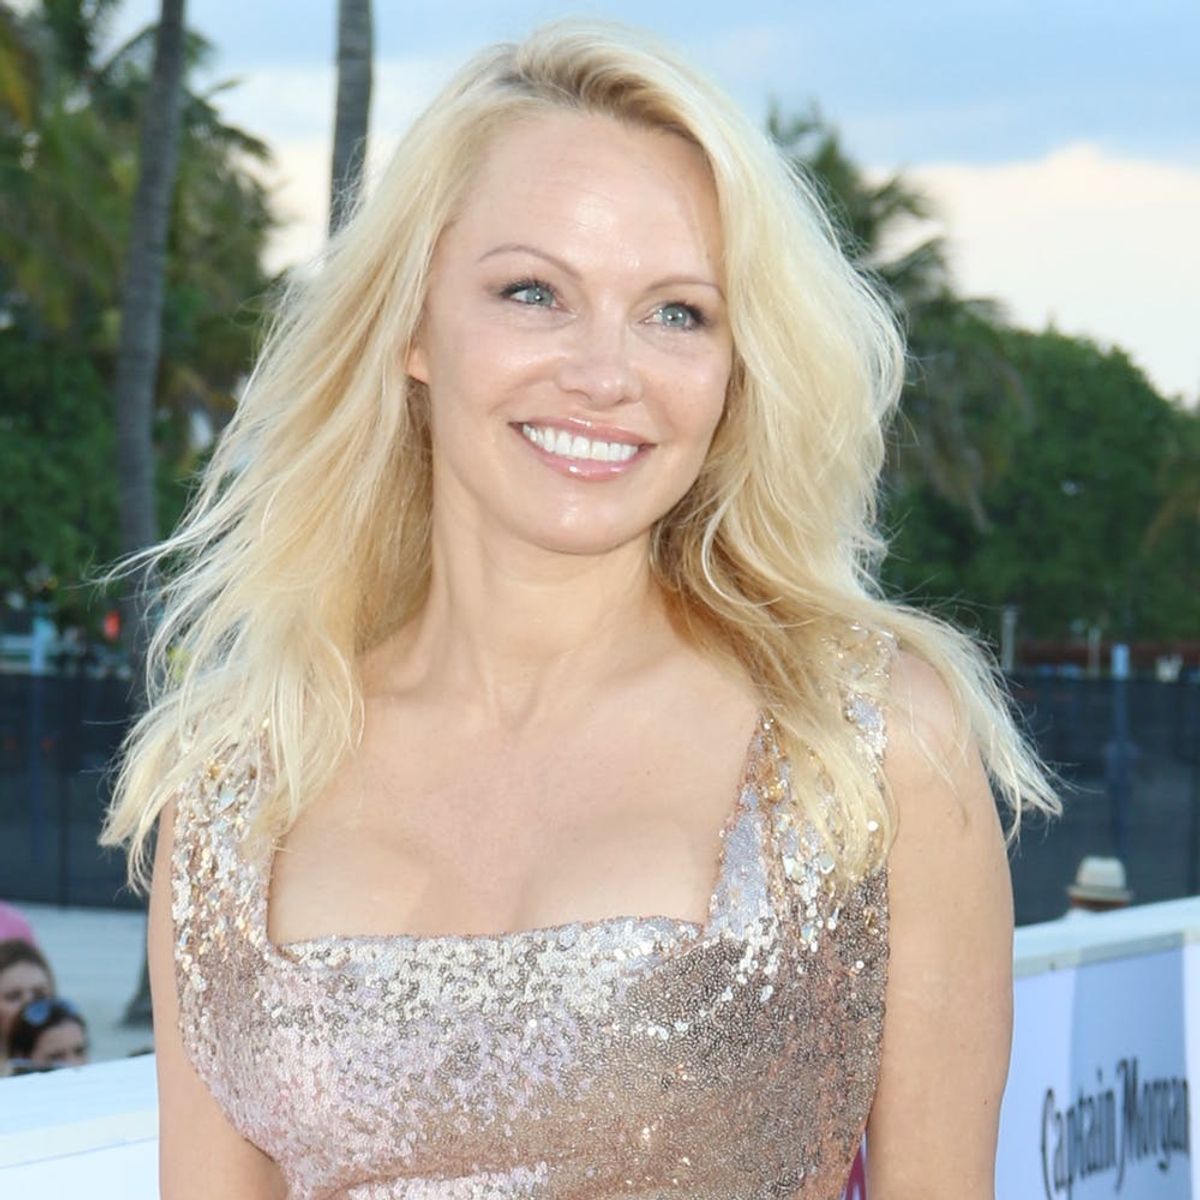 Pamela Anderson’s Makeunder at Cannes Has Us Doing a Double-Take